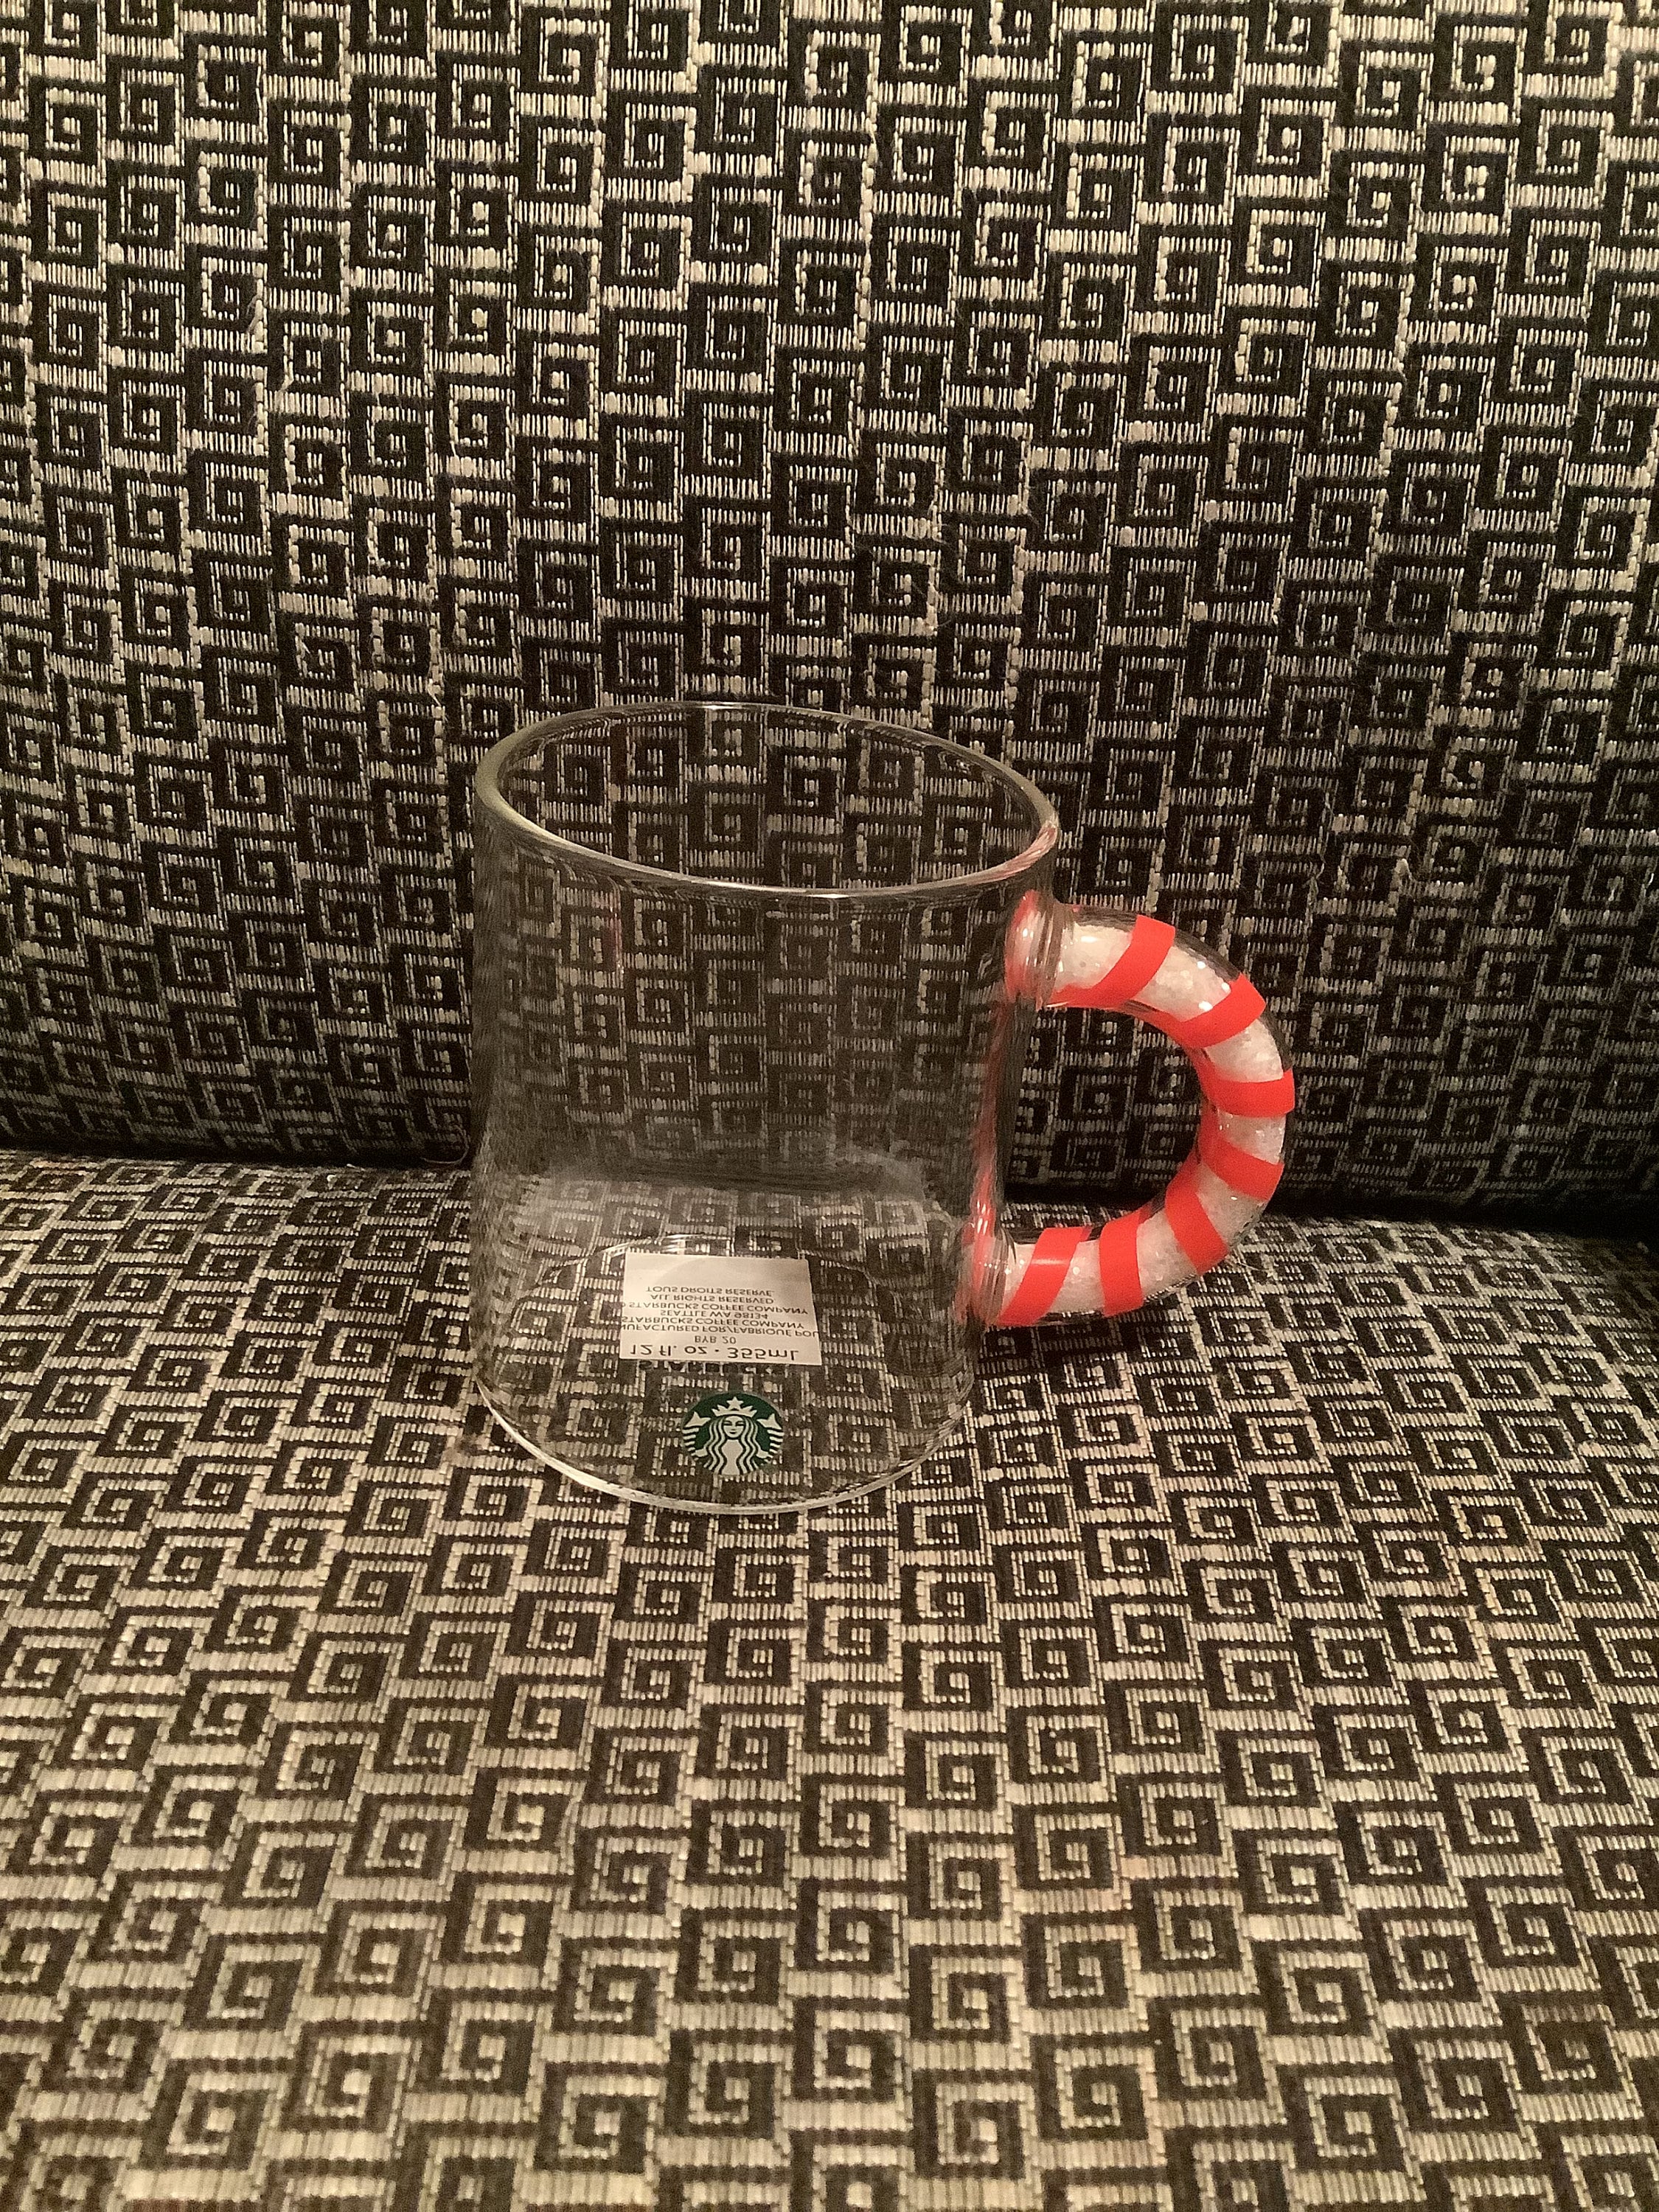 Candy Cane Pattern Tumbler Cup – Amy's Coffee Mugs